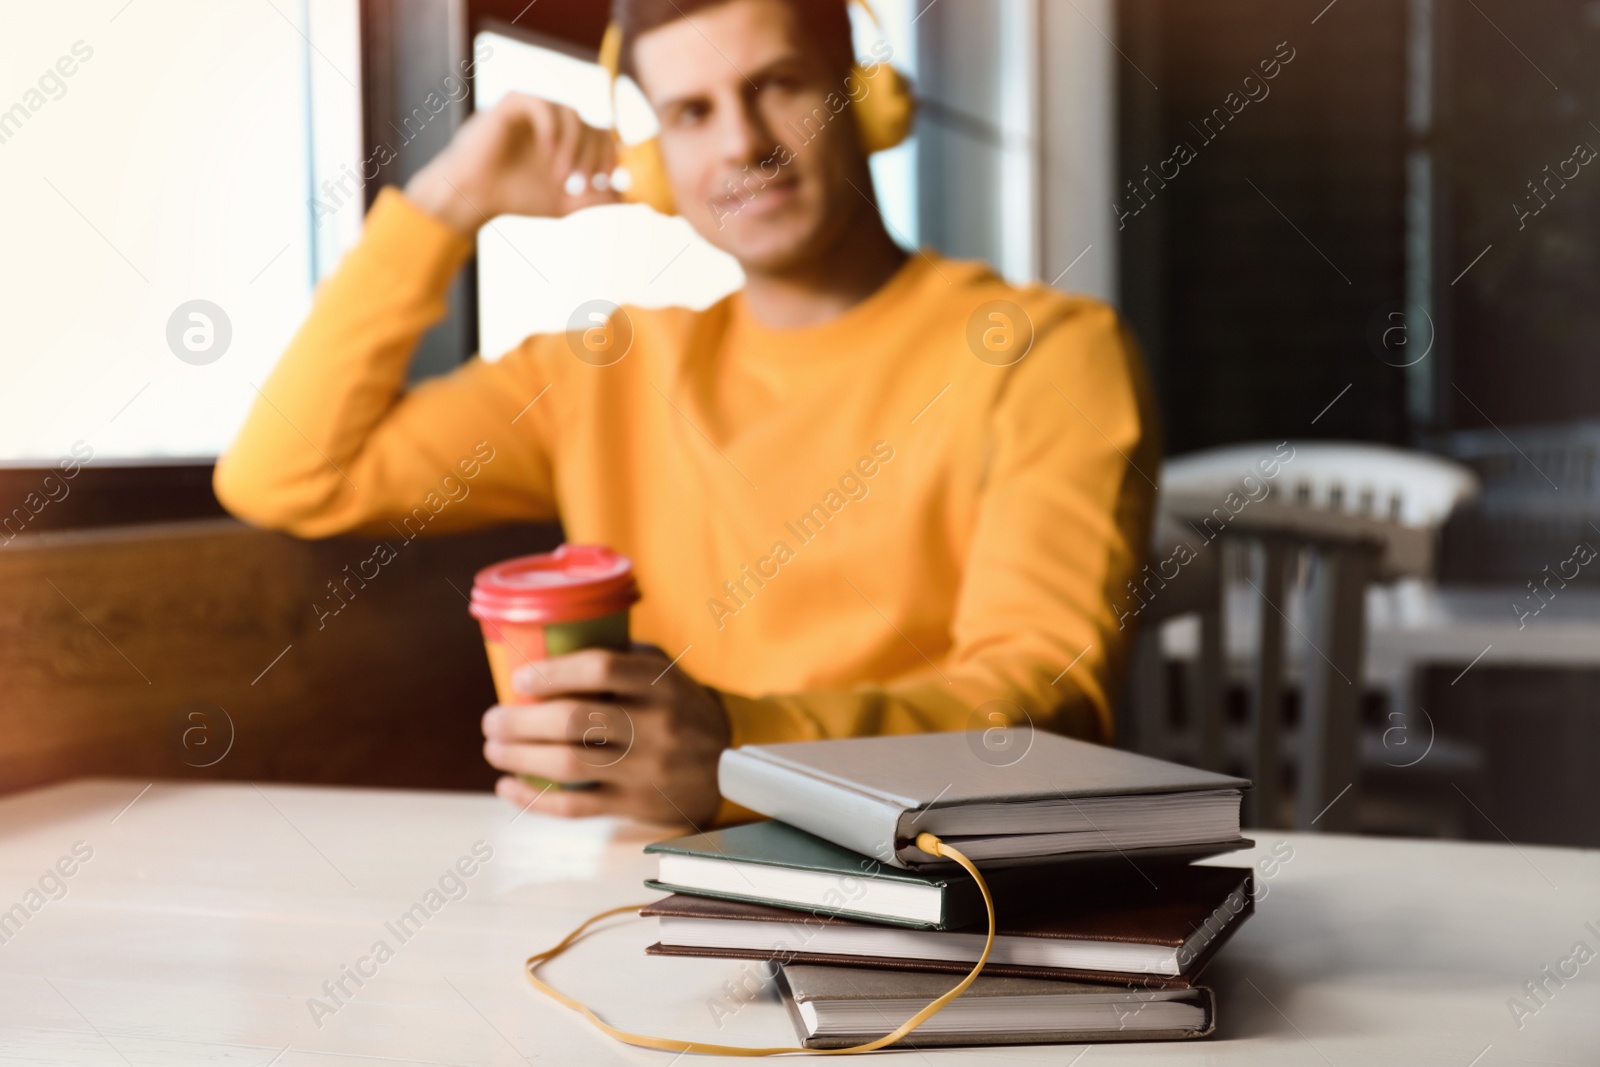 Photo of Man with headphones connected to book at table in cafe